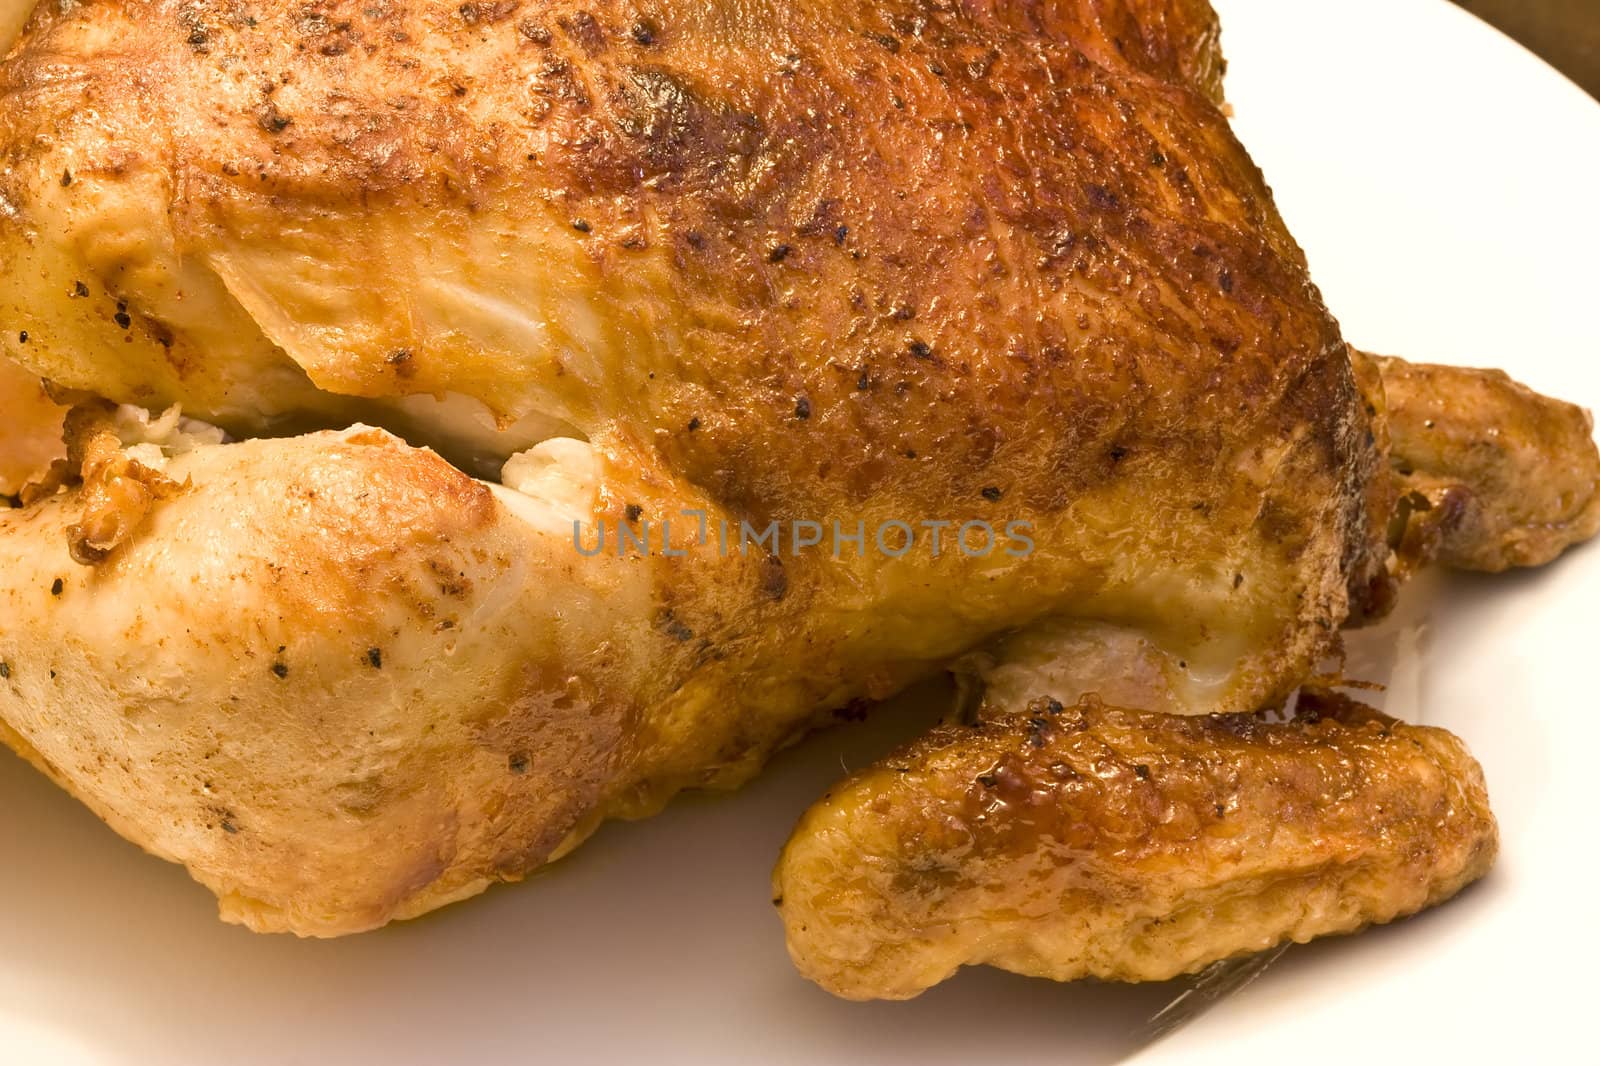 roasted chicken on a white platter cooked nicely